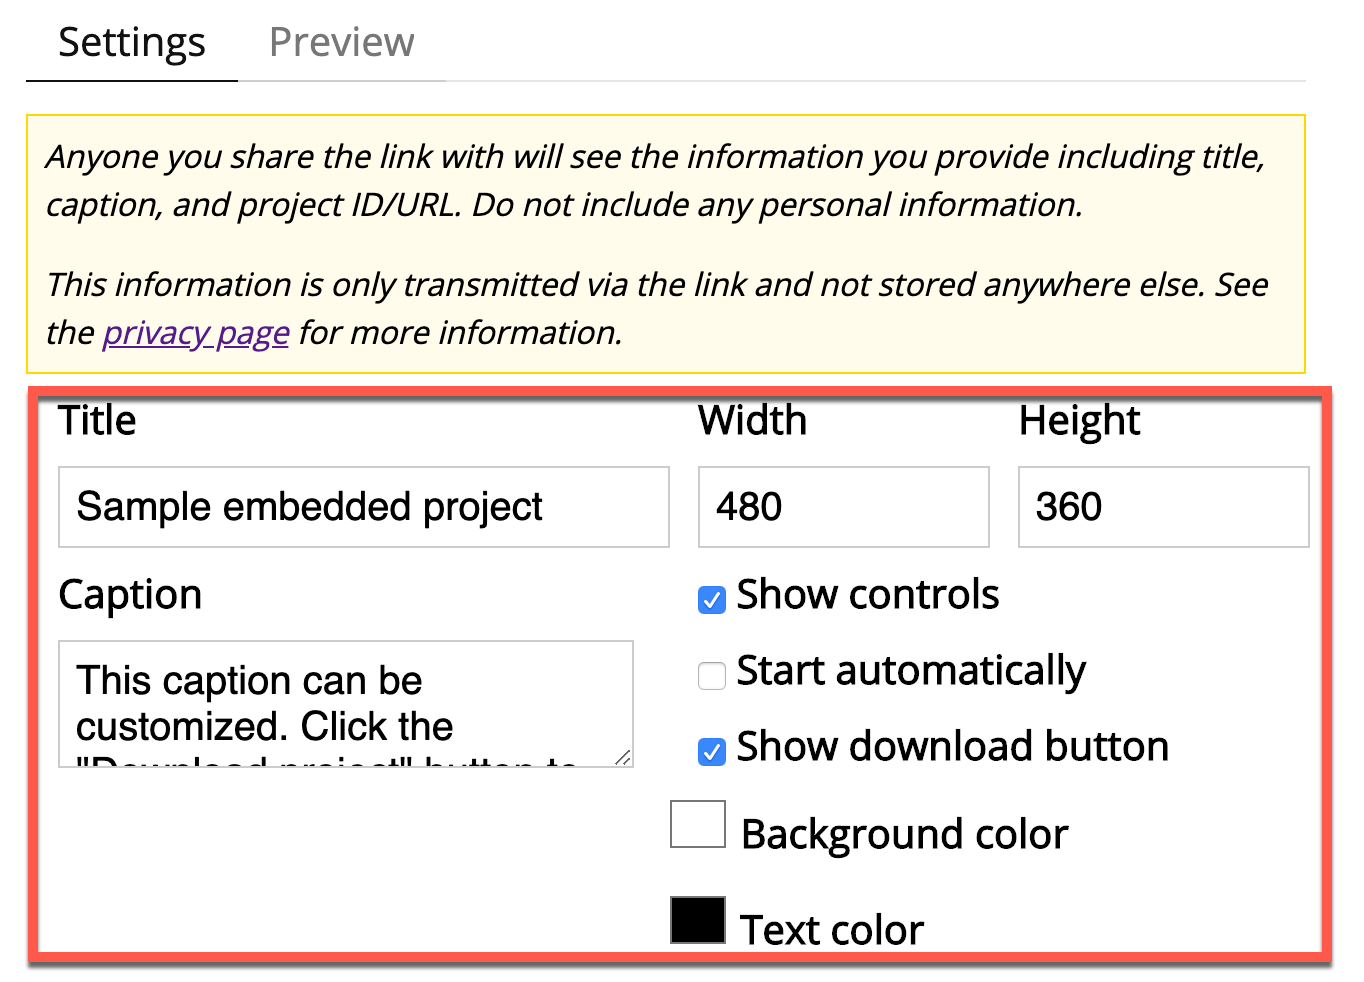 Screenshot of the controls that can be used to customize the appearance of the Scratch project. Fields include title, caption, width, height, show controls, start automatically, show download button, background color, and text color